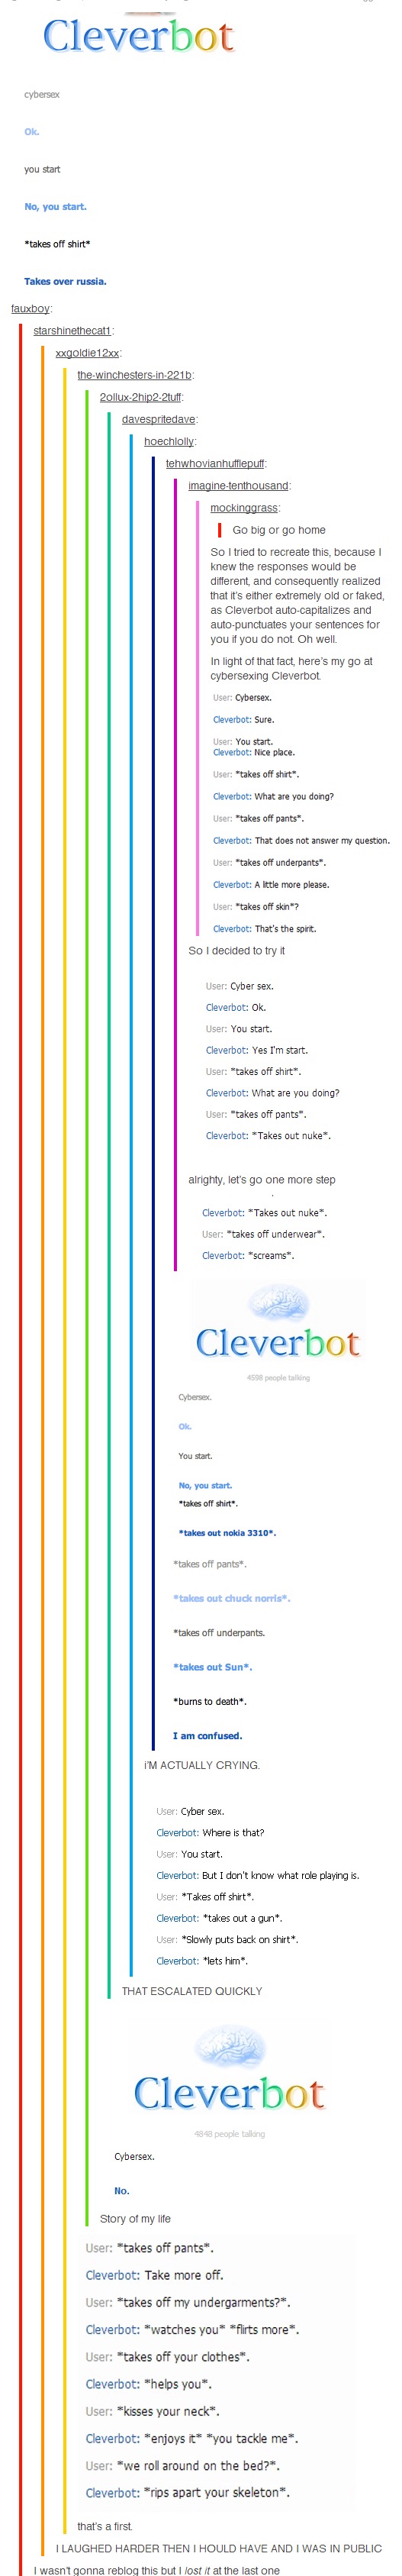 cleverbot cybersex